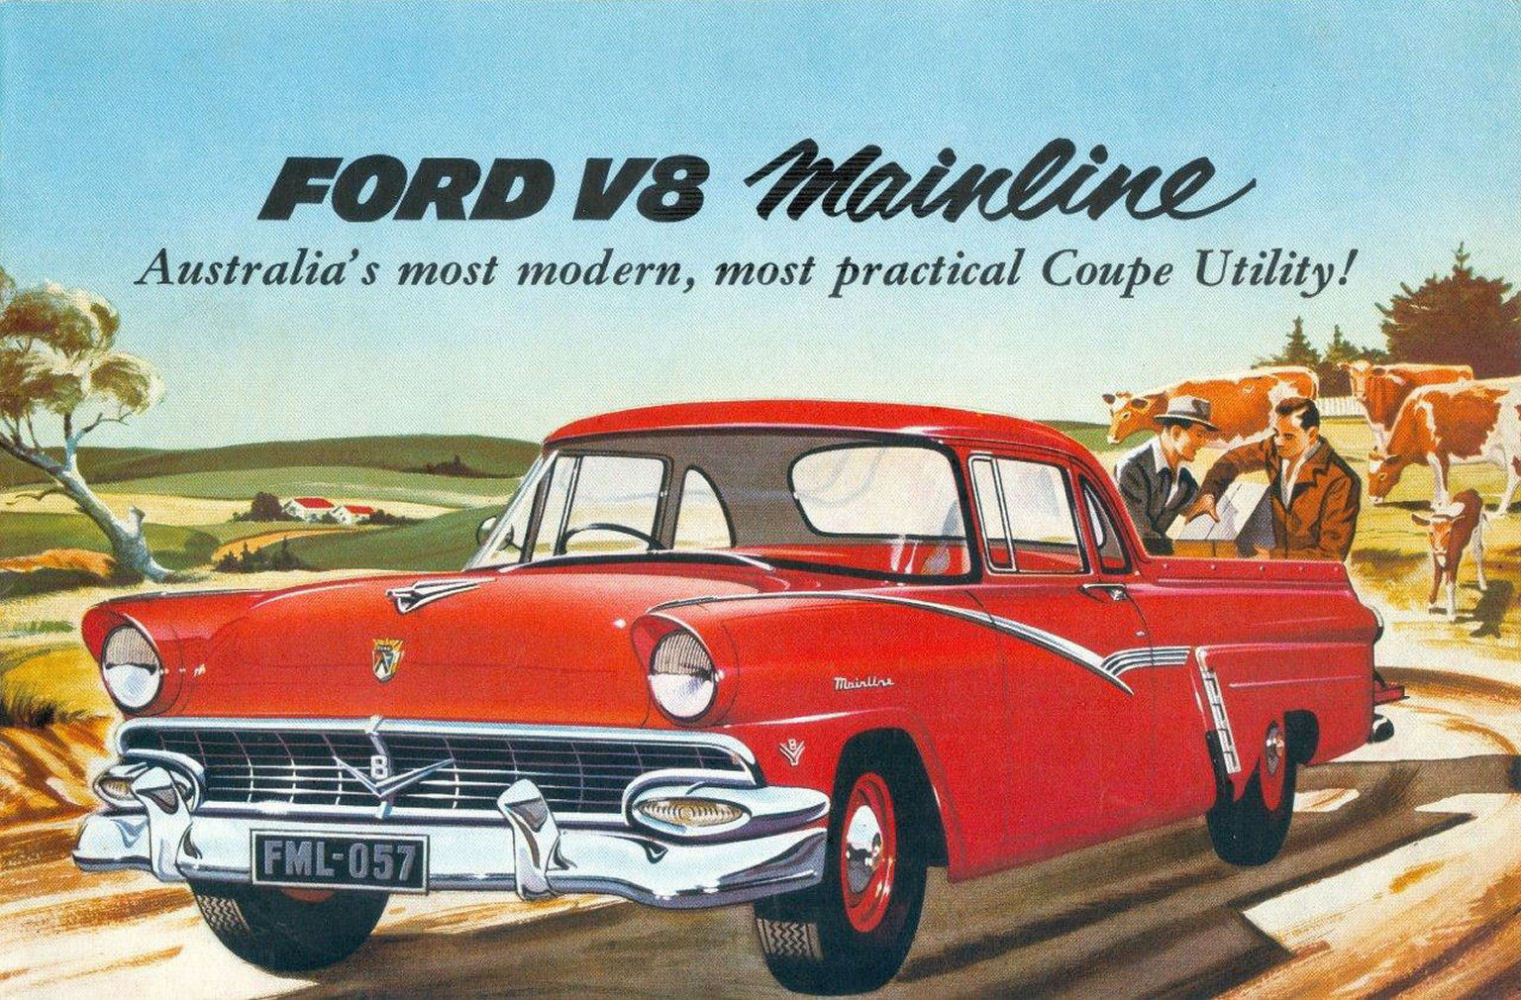 n_1957 Ford Mainline Coupe Utility-01.jpg